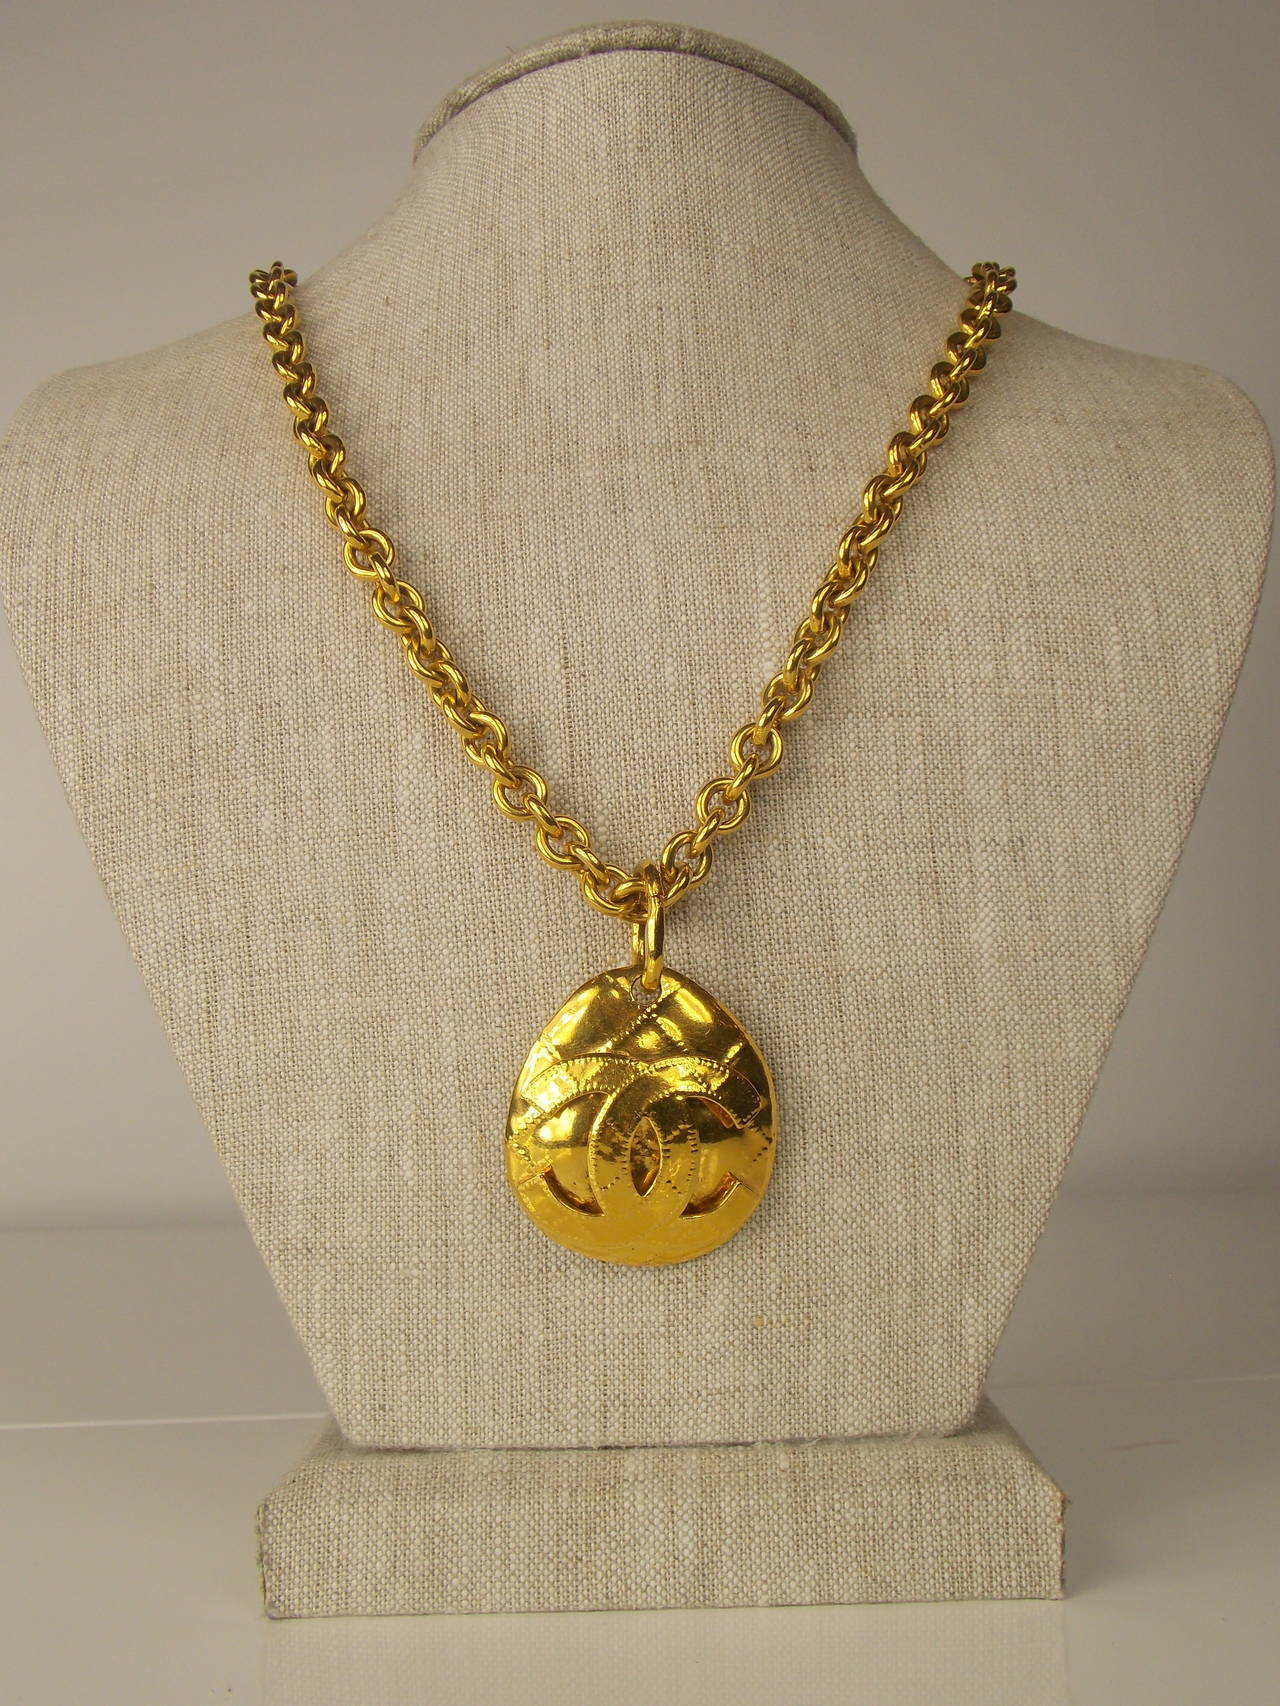 The CC logo is captured in this simple statement style round medallion necklace. Crafted in 24k gold gilded hardware on a short chain. This statement making piece will transform any outfit go from day to date effortlessly.
Excellent condition